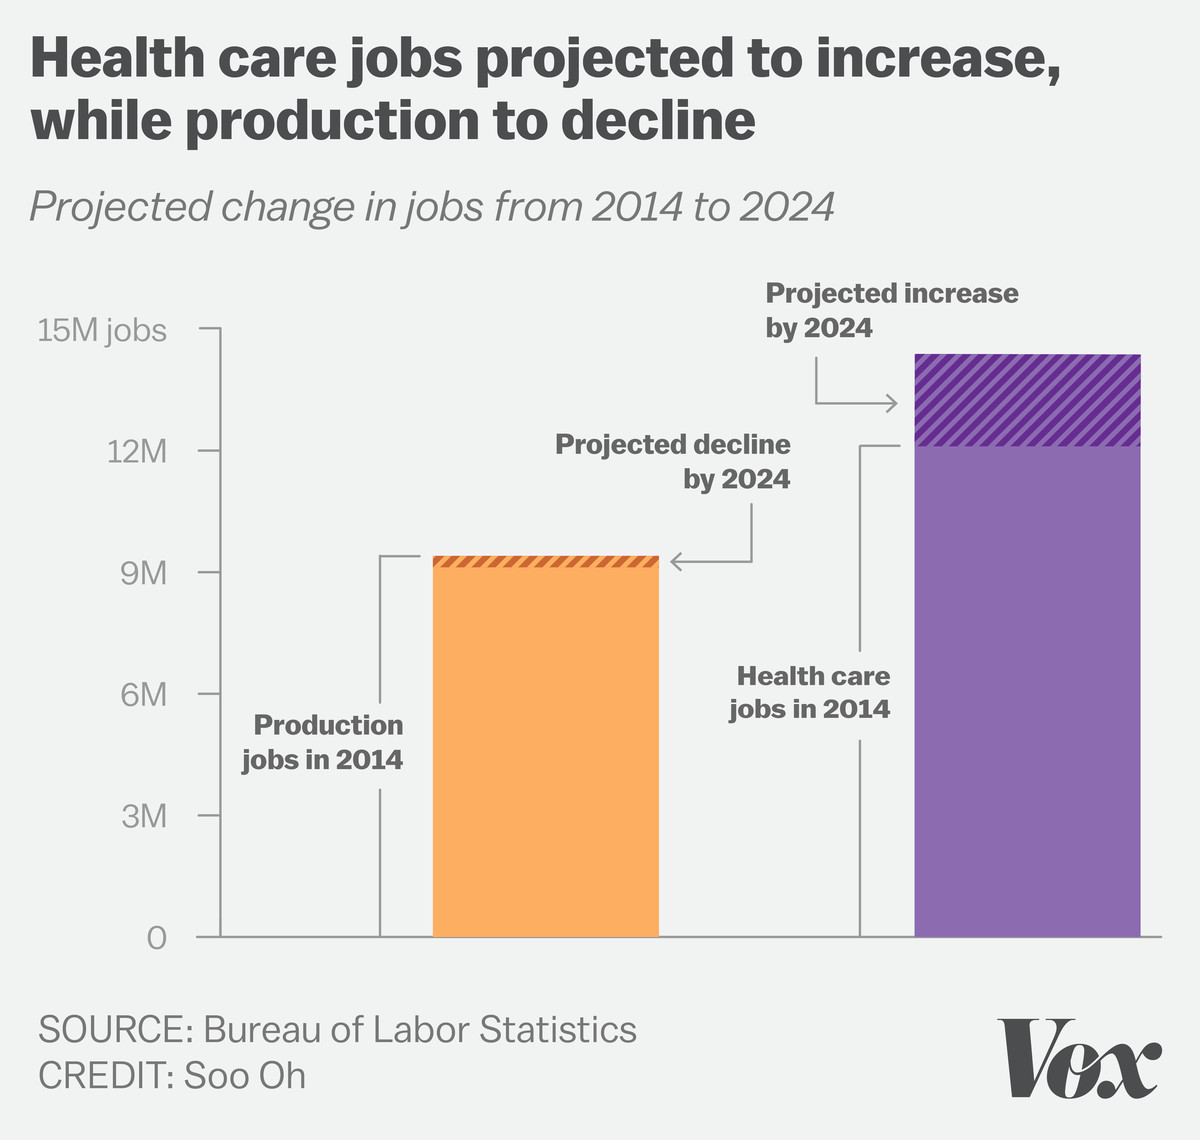 Health care jobs projected to increase, while production to decline